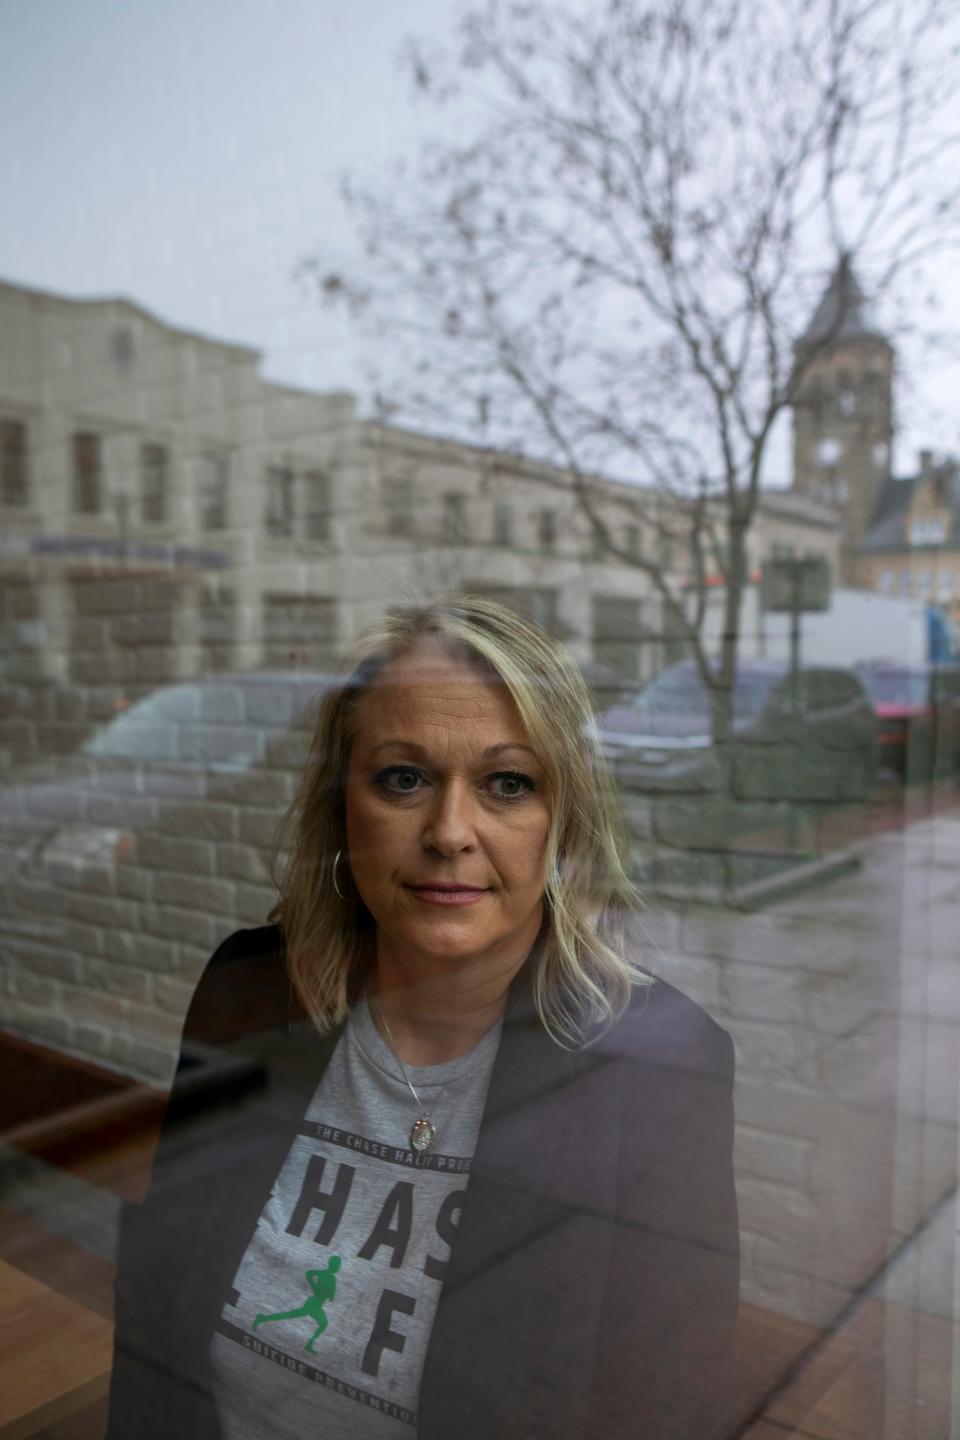 Sarah Haley looks out of the window, as the reflection of downtown Lancaster is caught in the reflection, on Mar. 6, 2024, in Lancaster, Ohio. Sarah started the Chase Haley Project, which is a support and education group, after her son died by suicide in 2022.